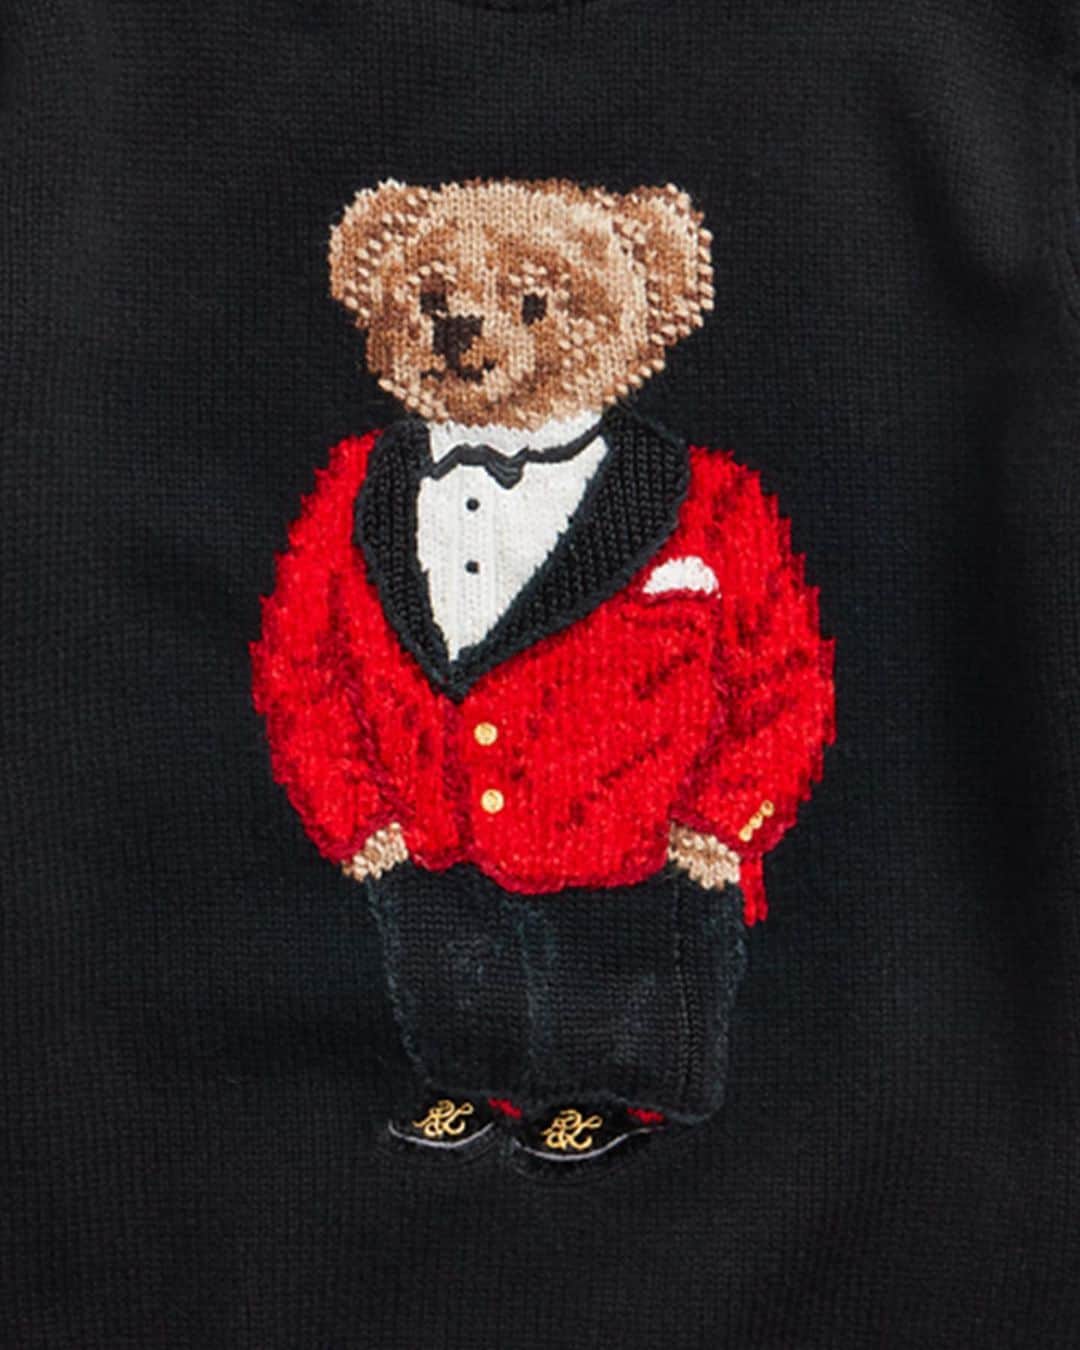 Our beloved #PoloBear appears in our latest men's collection